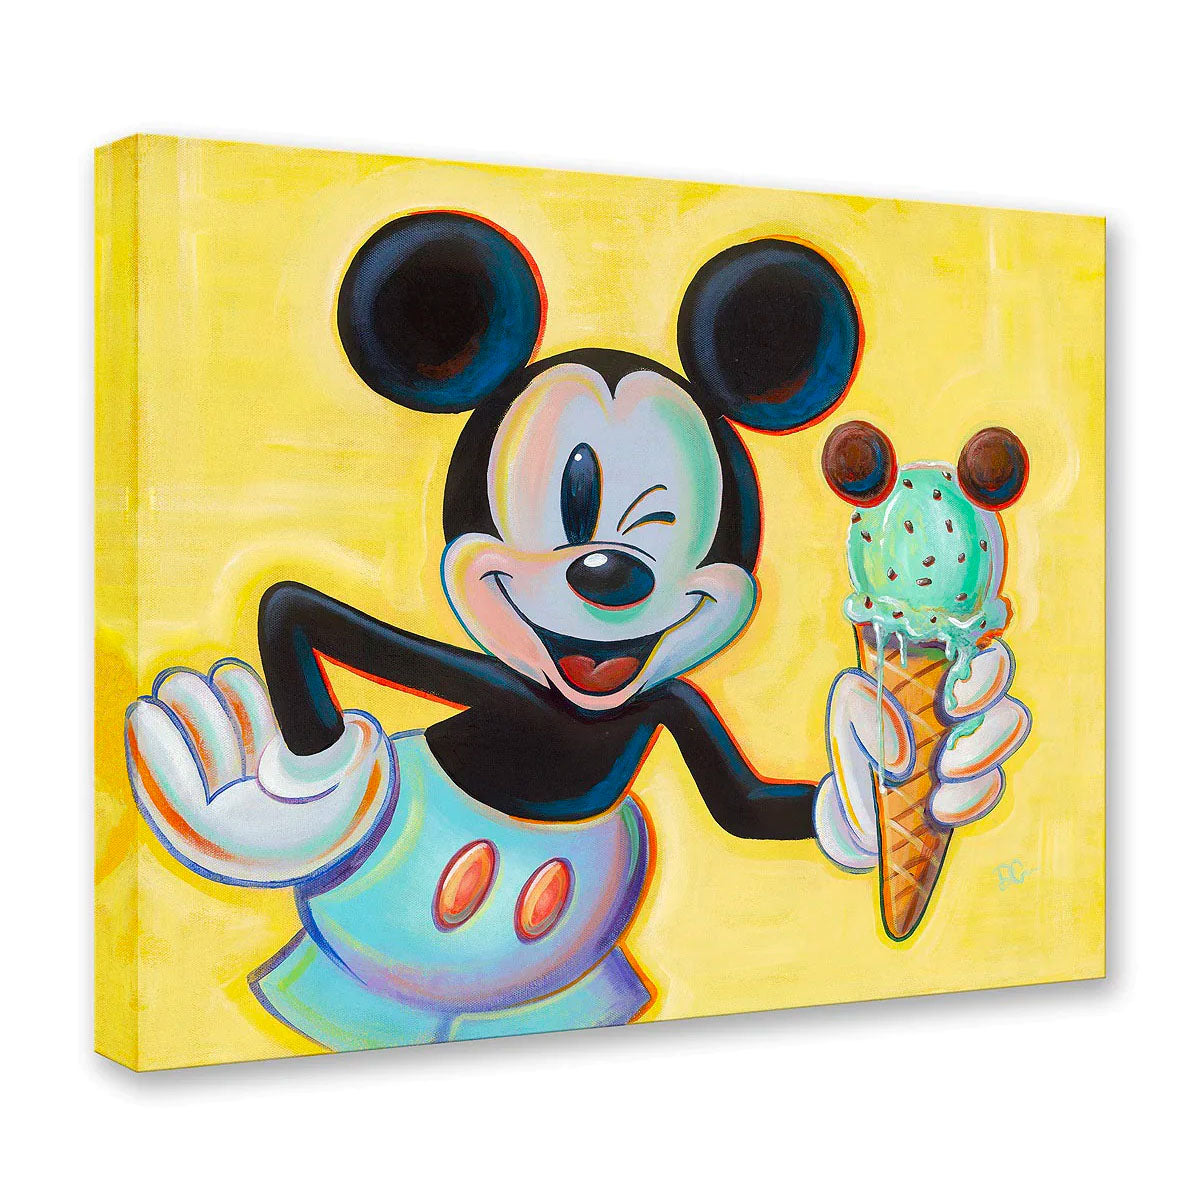 Dom Corona Disney "Minty Mouse" Limited Edition Canvas Giclee